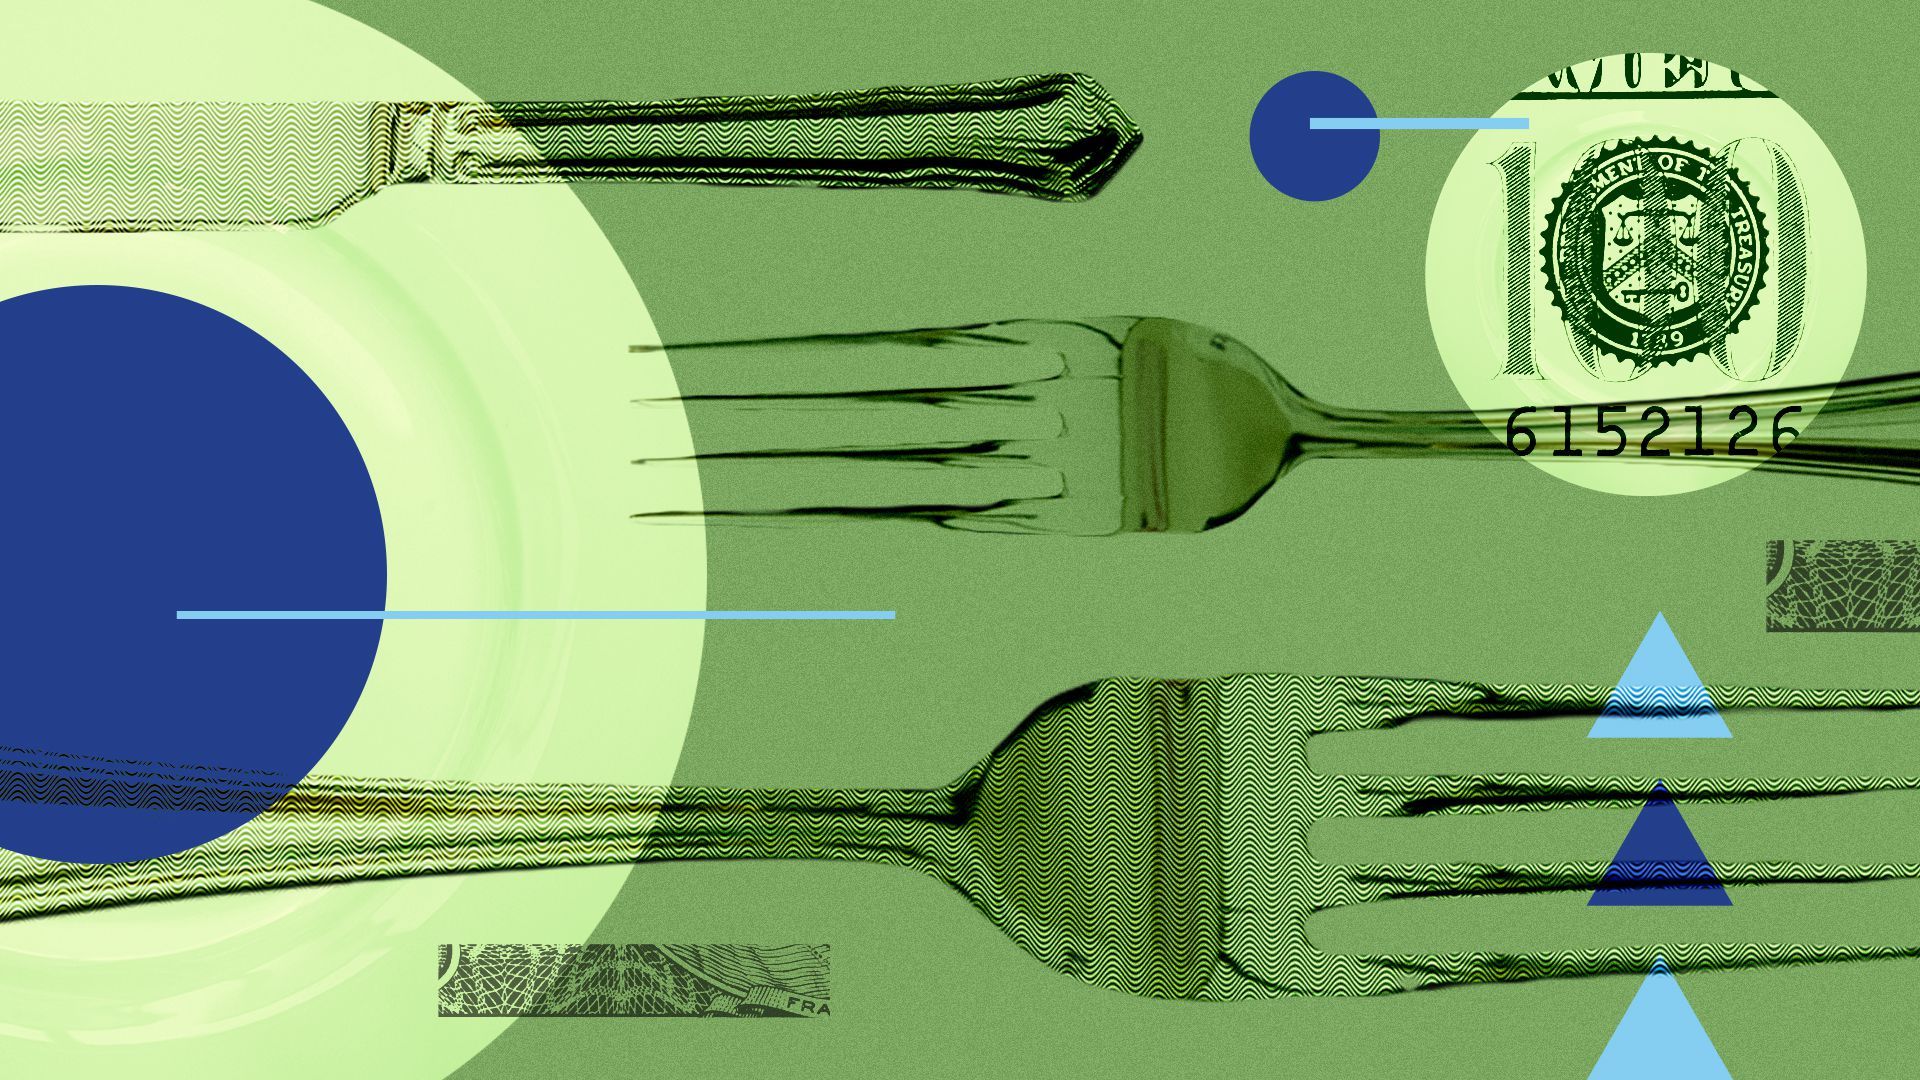 Illustration of forks, knives, plates, money and abstract shapes.